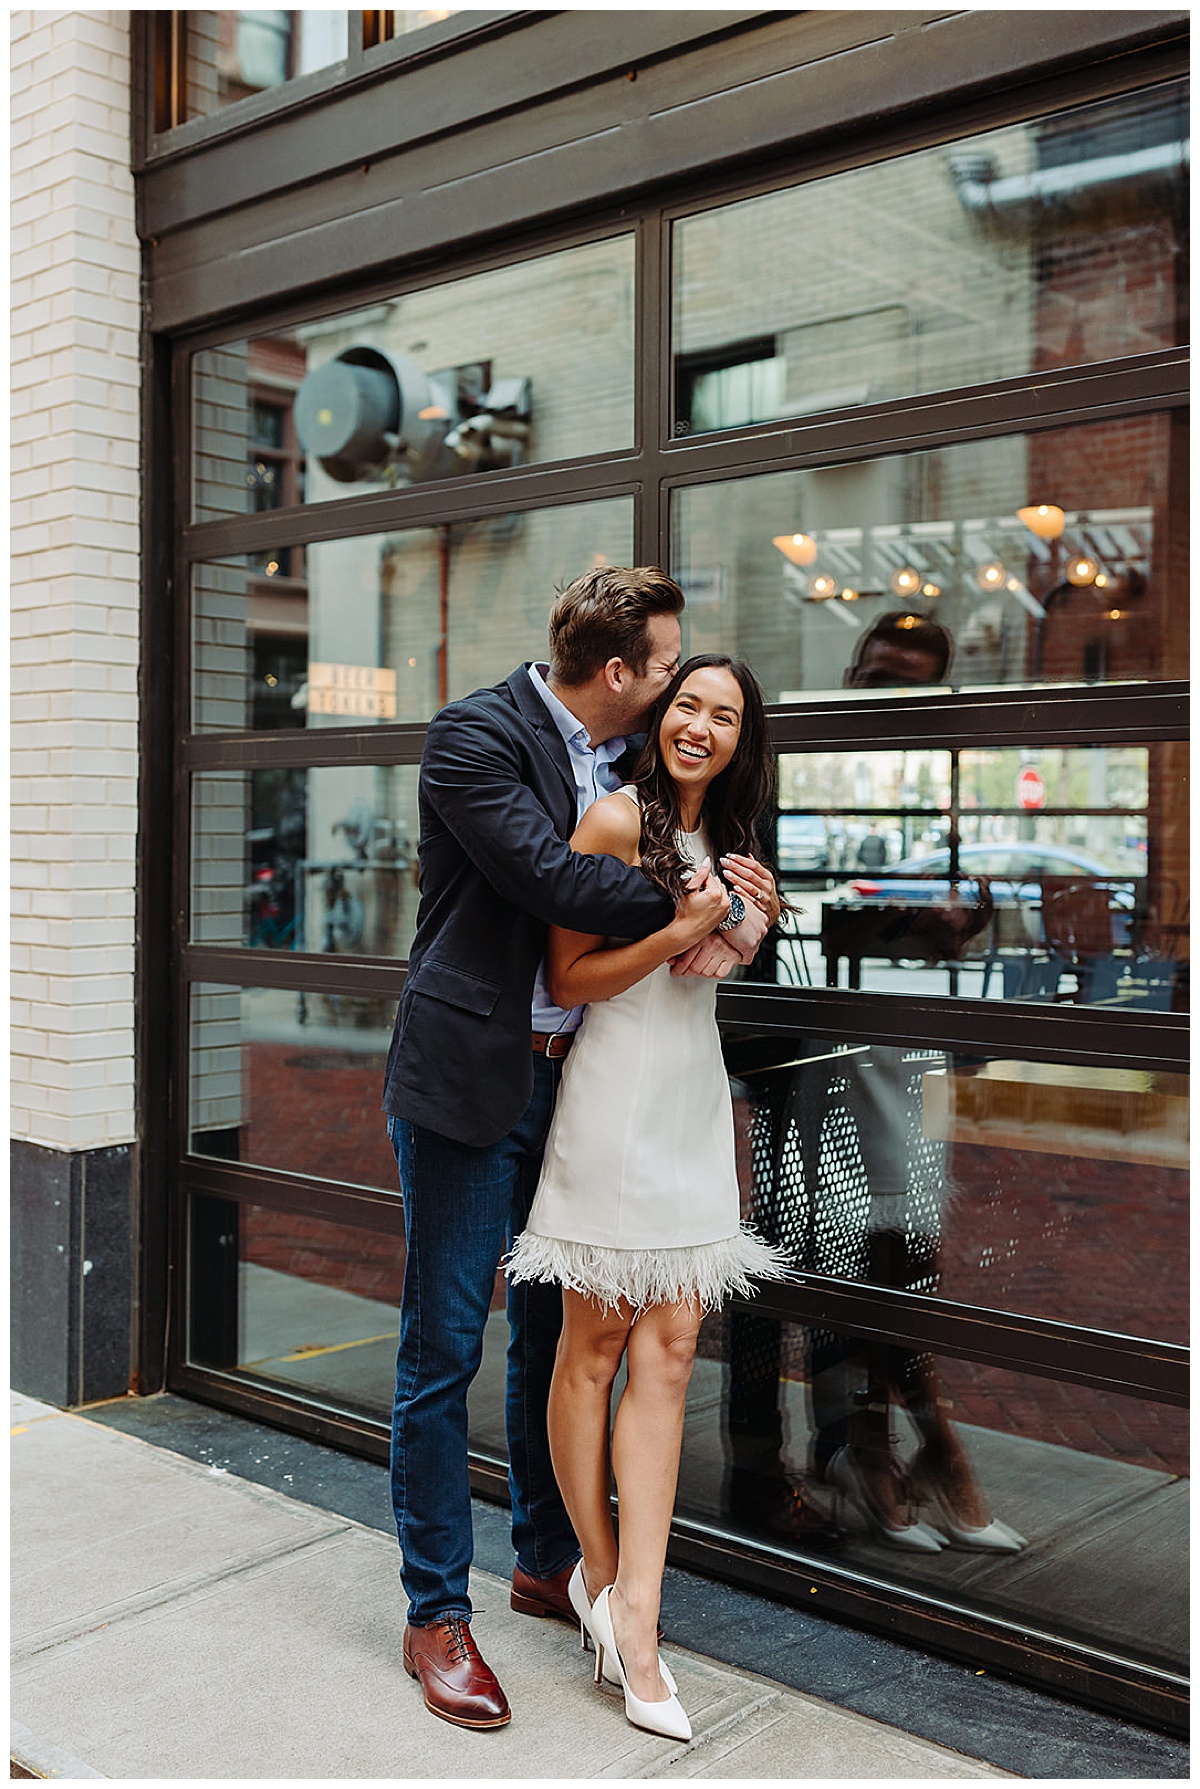 Man hugs and kisses woman for DIA Engagement Session